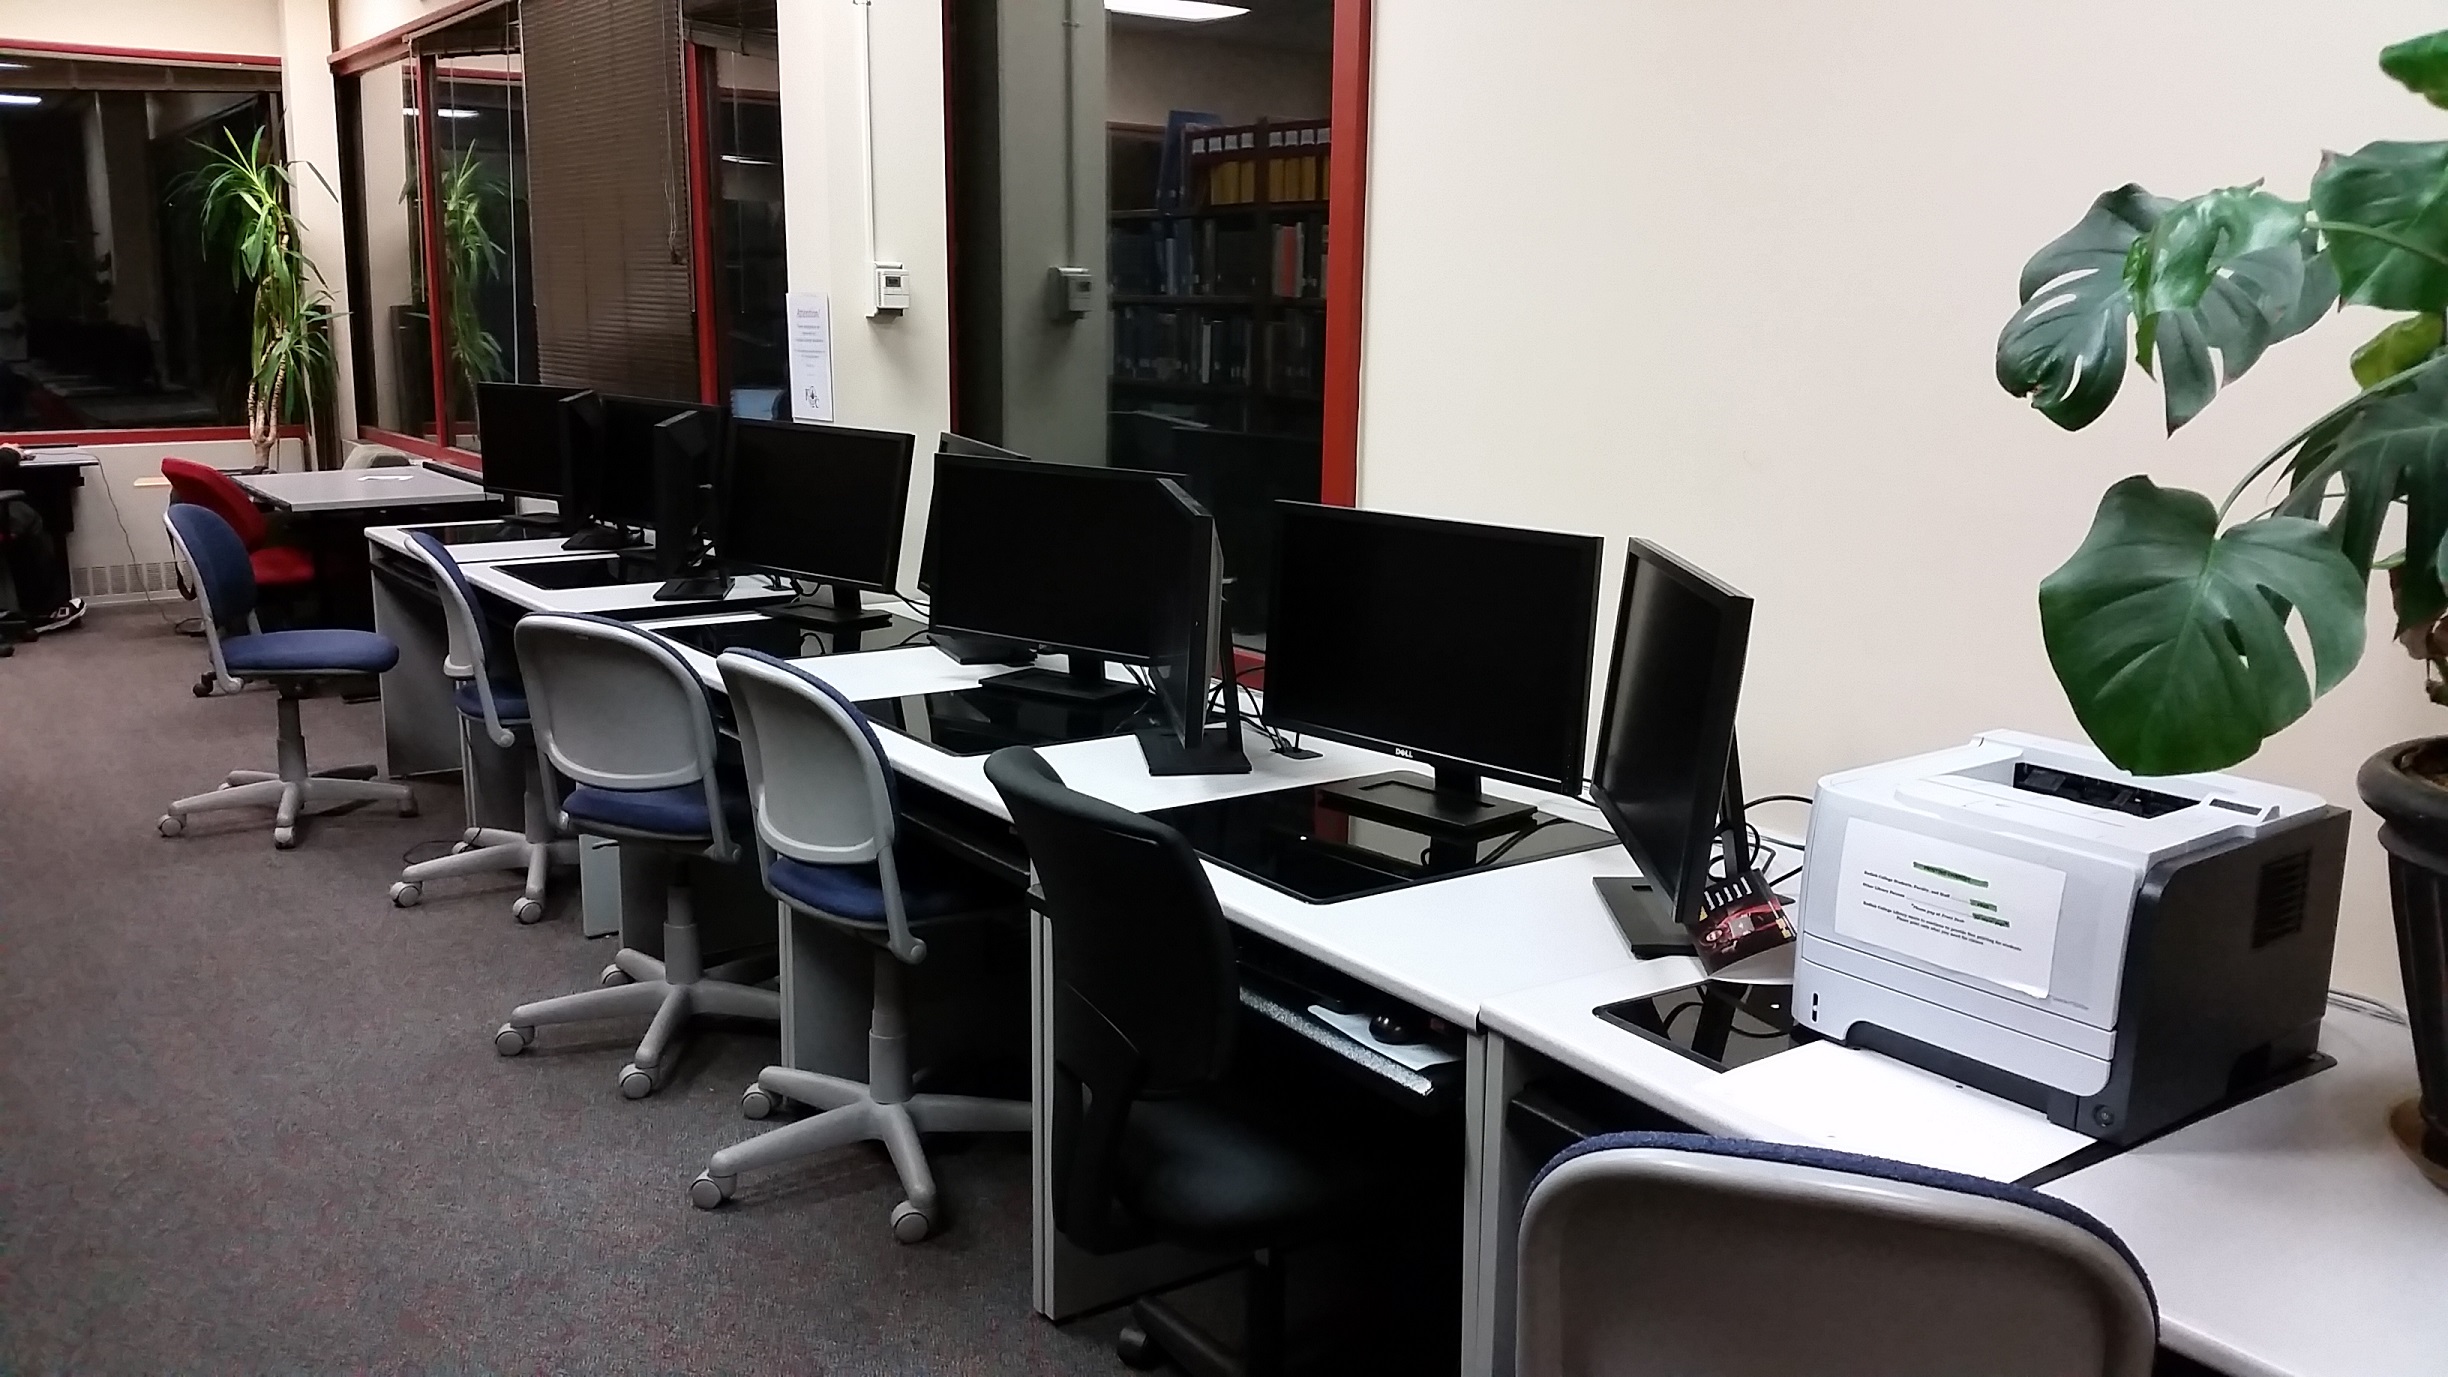 picture of 5 double-screen computer workstations and a printer in the rear of the library